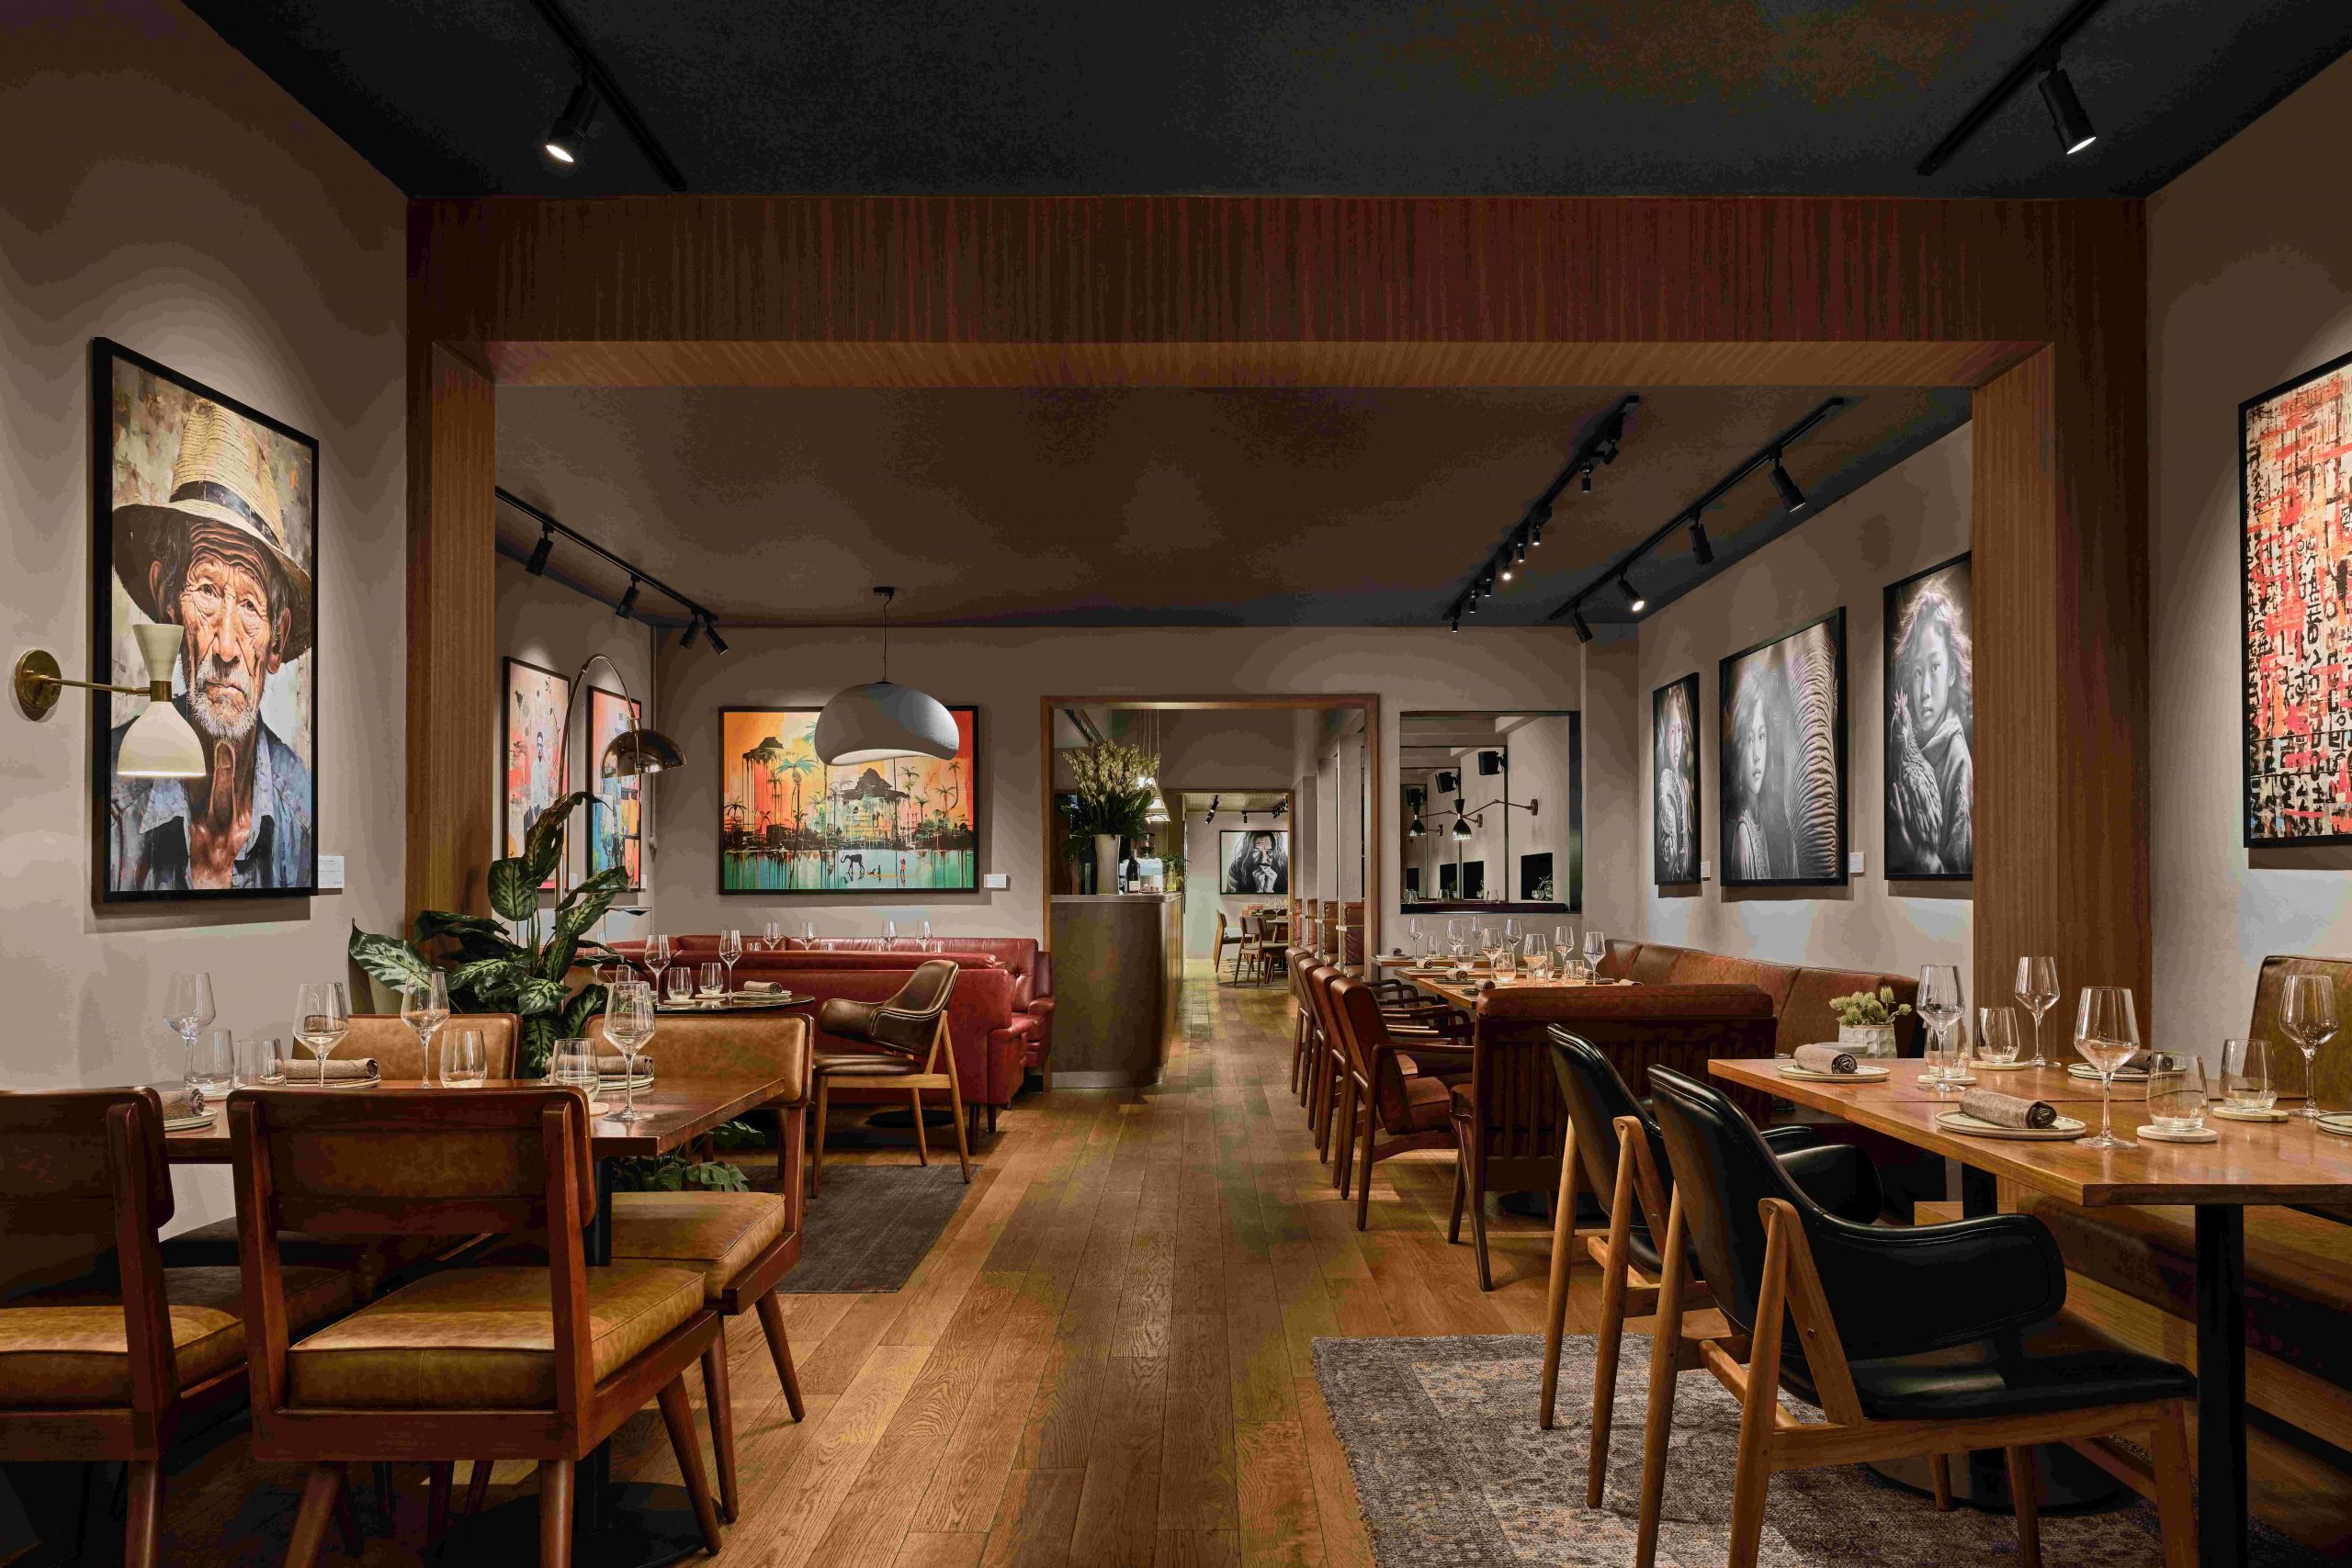 , Vietnamese cuisine gets a modern spin at Lo Quay